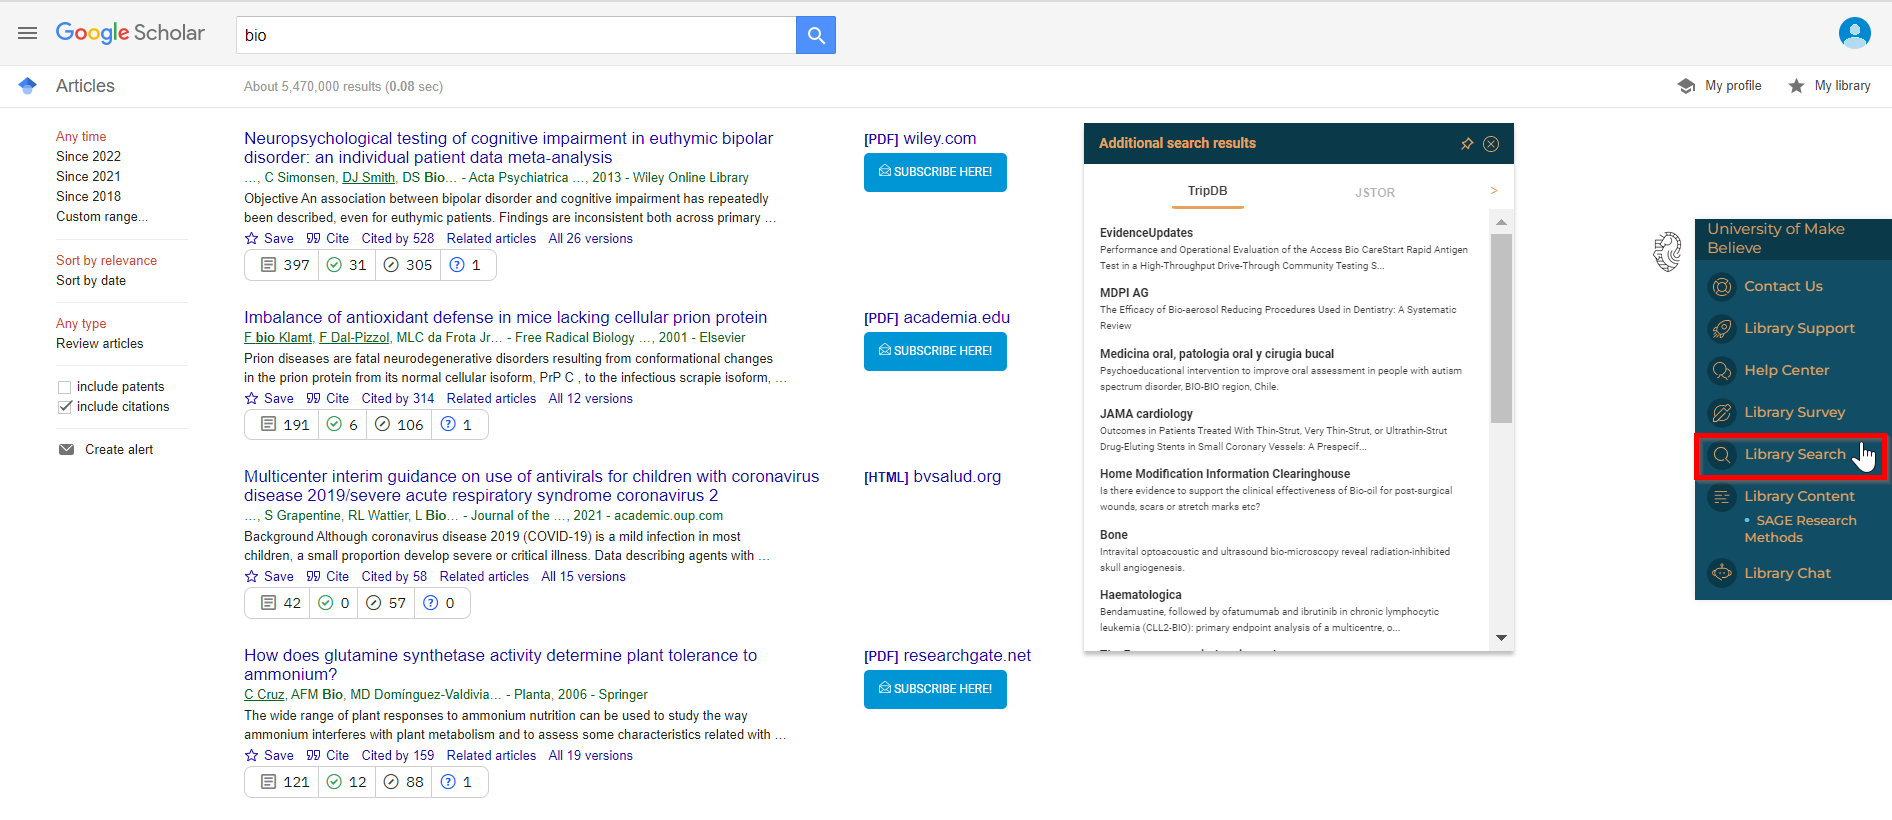 An example of the Additional Search Results feature